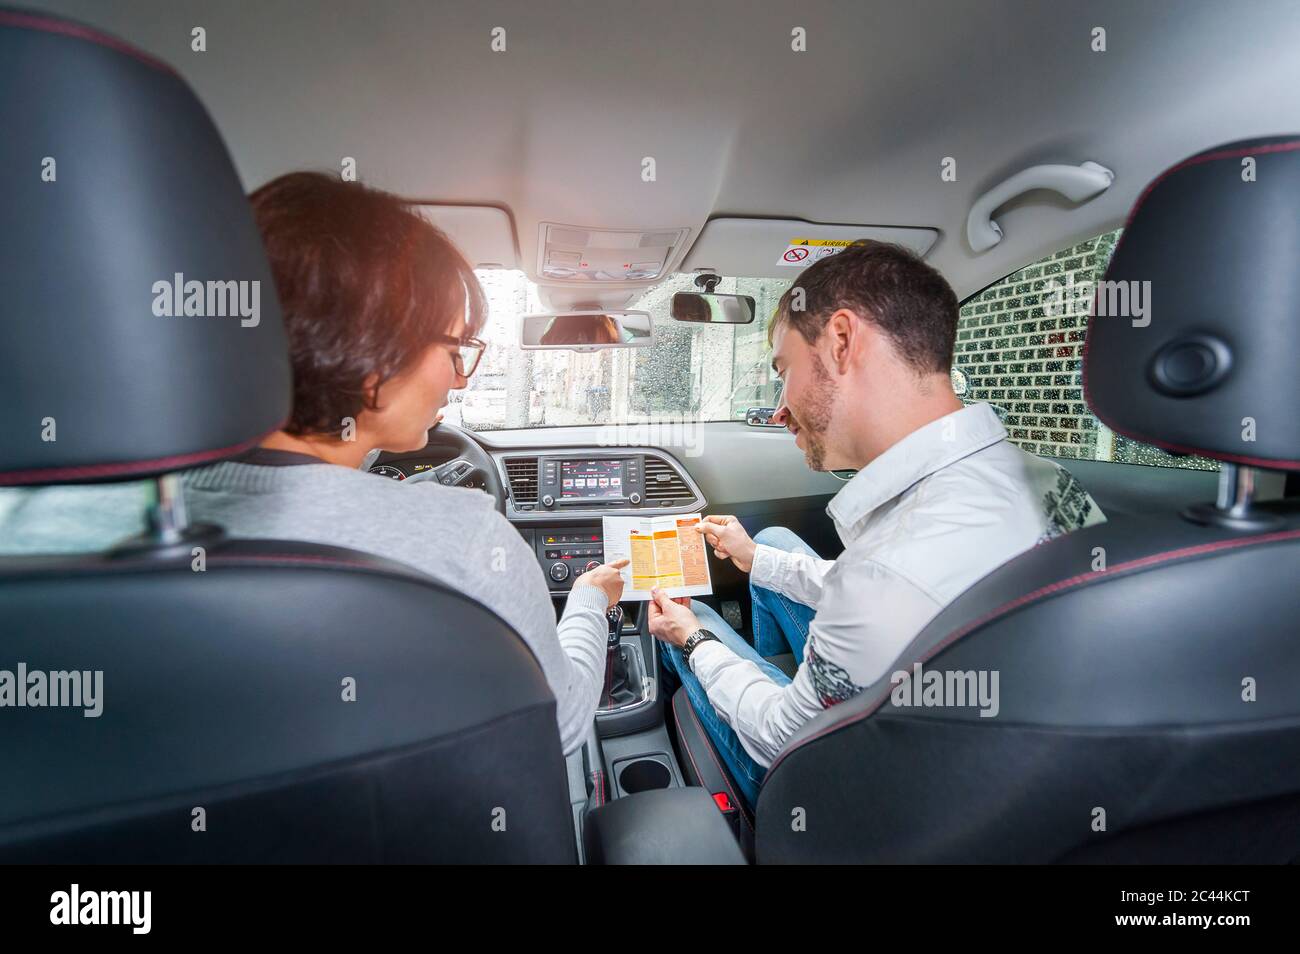 Female learner driver with instructor in car looking at test script Stock Photo